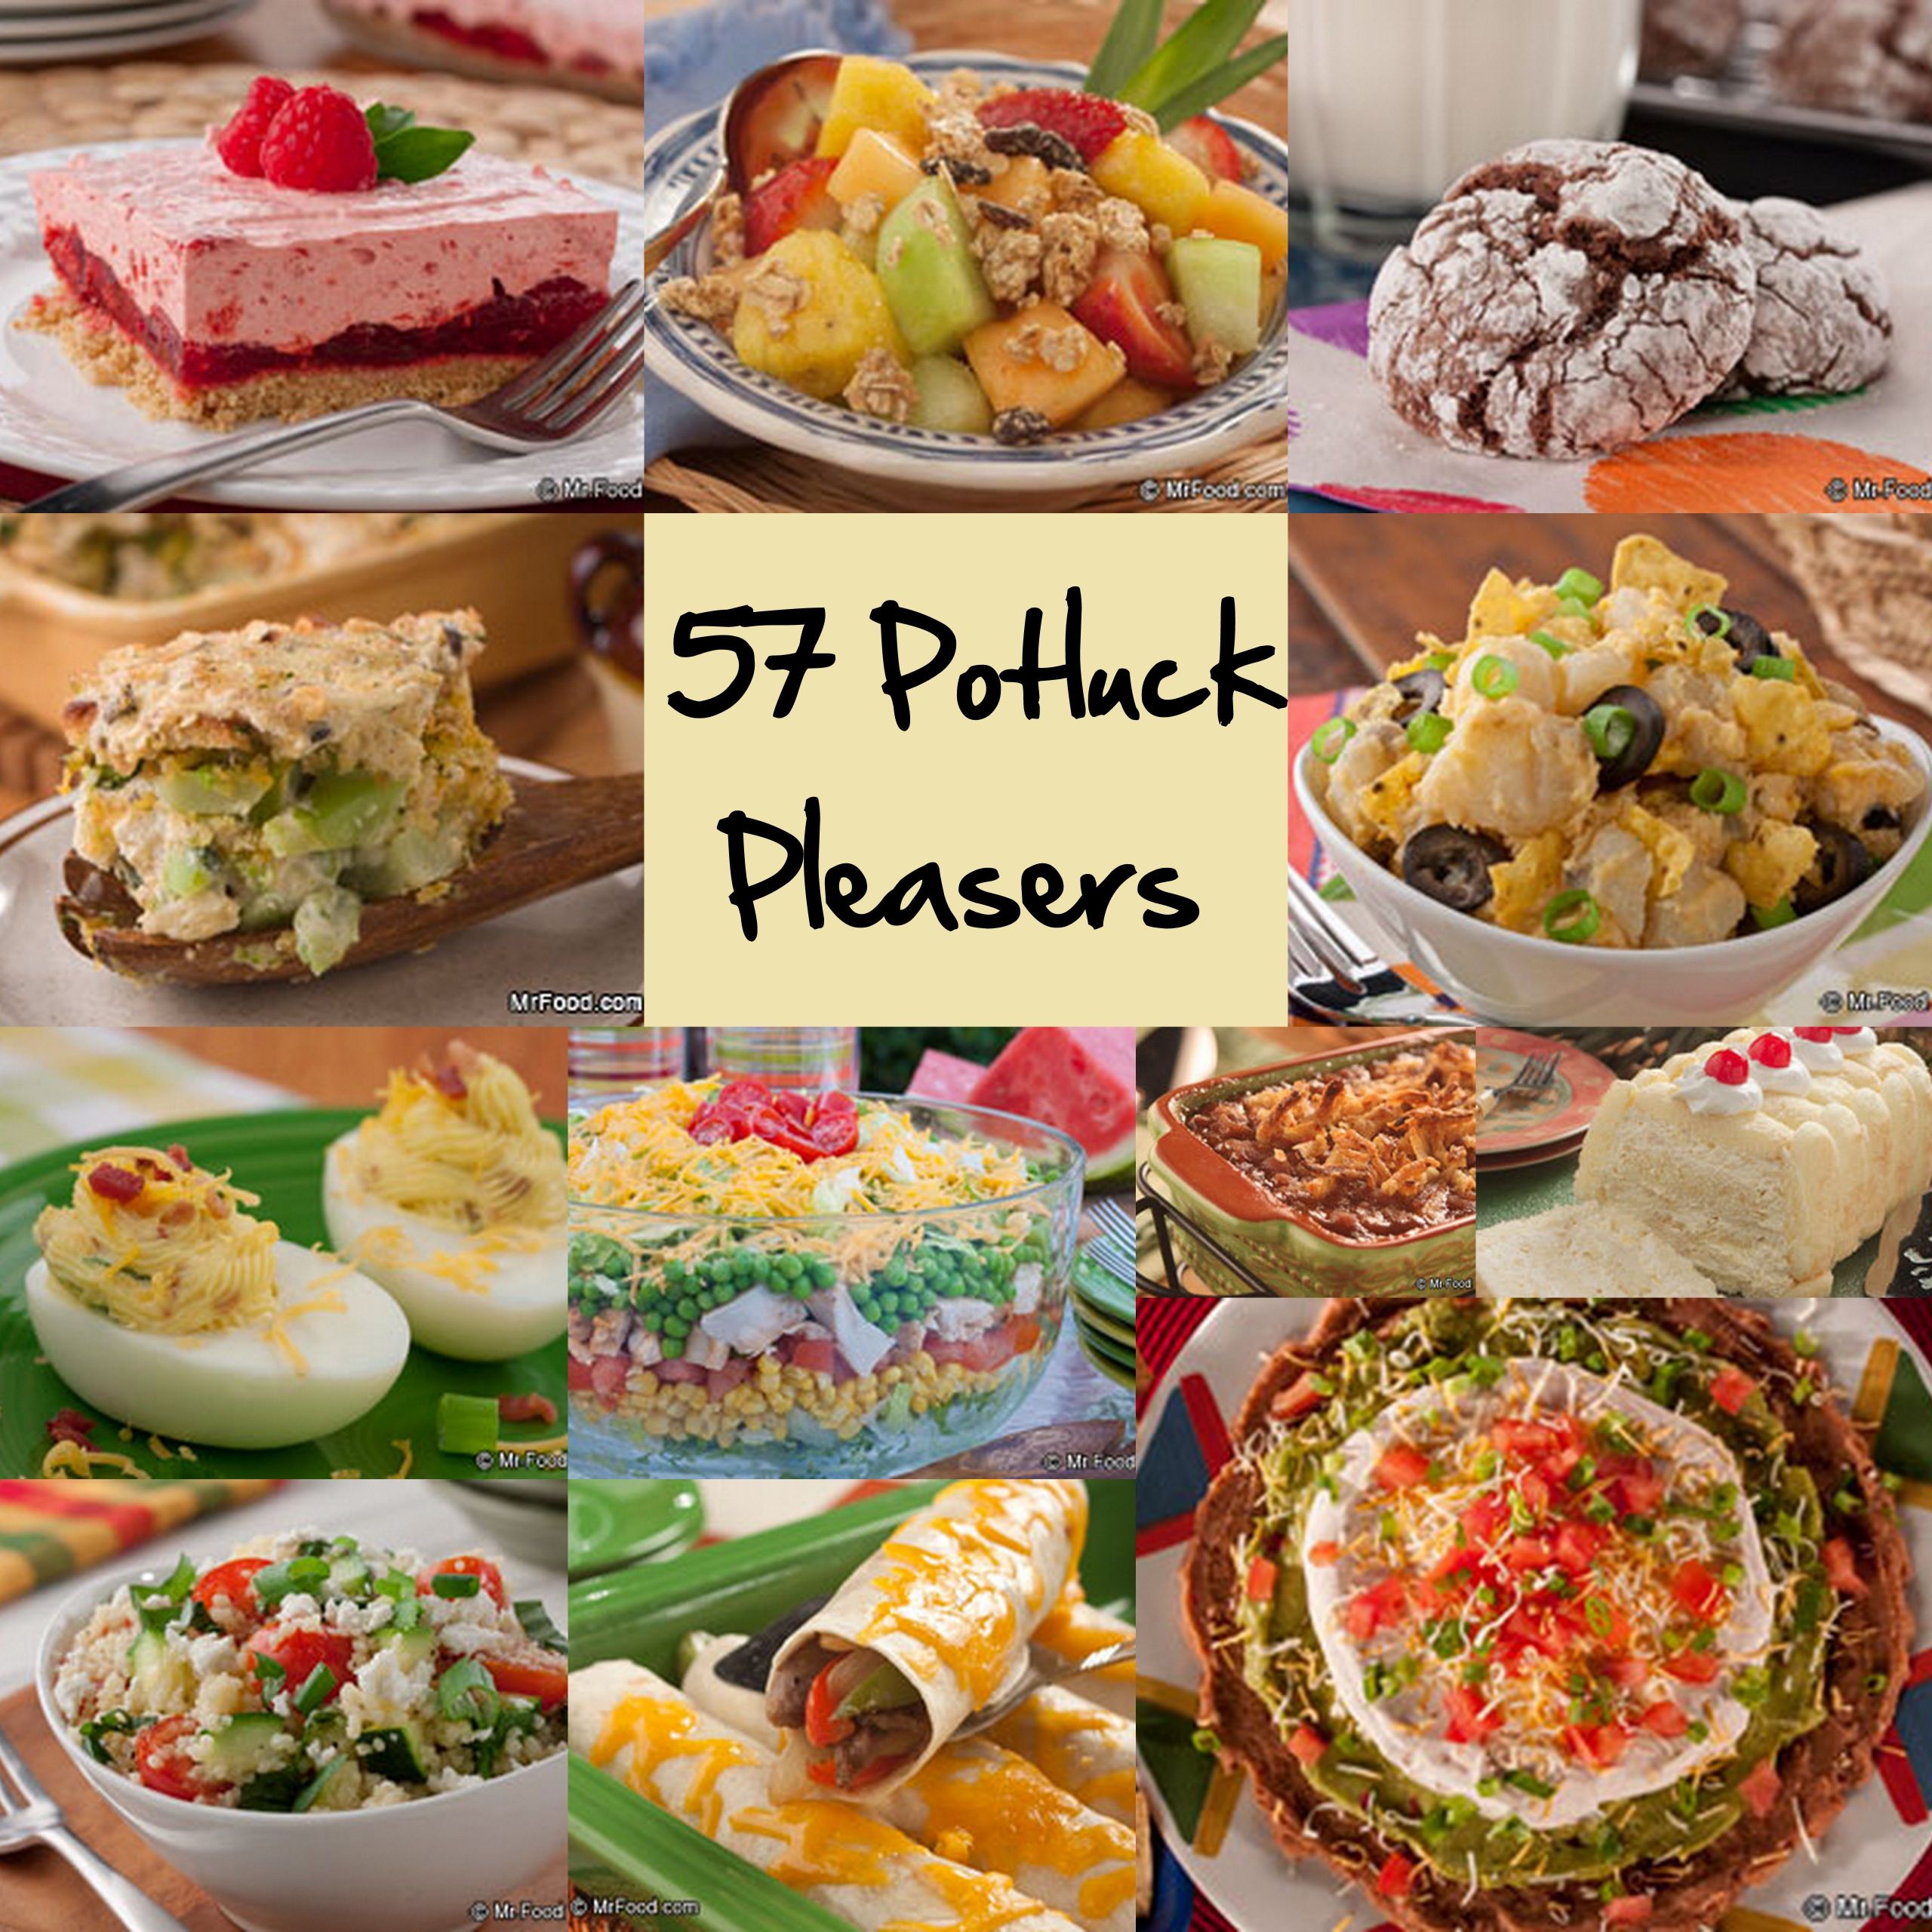 Main Dishes Potluck
 The next time you need that perfect potluck dish for a